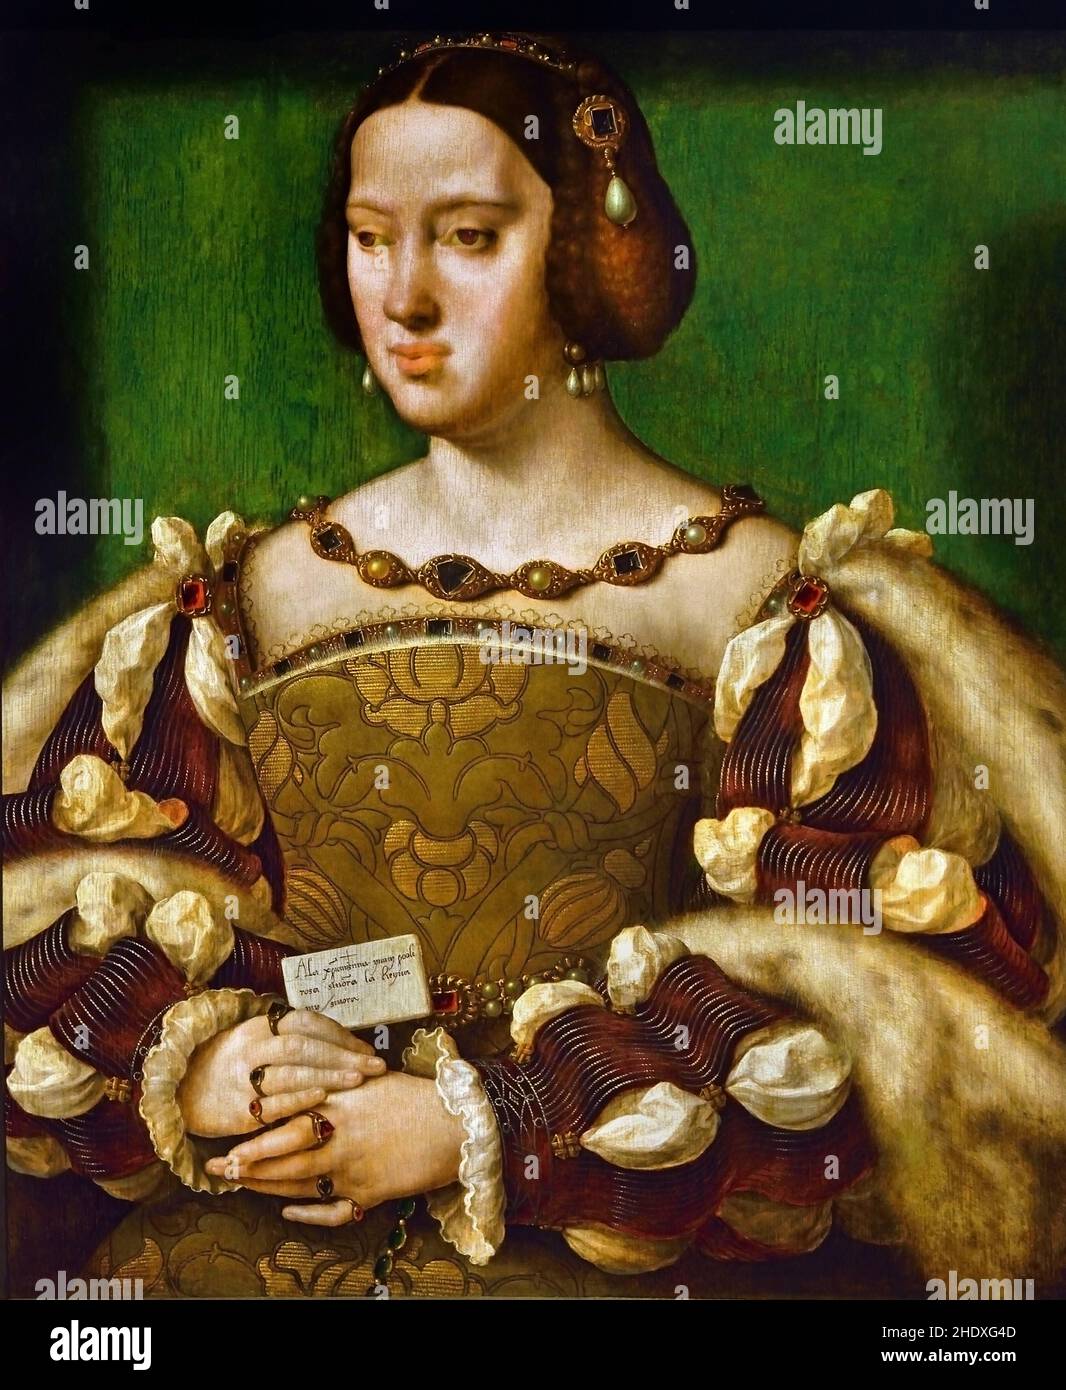 Eleanora of Austria, Queen of France (1498-1558), Joos van Cleve (1485-1540/1541)  Flemish Belgian Belgium ( Eleanora of Austria (1498-1558), sister of the Holy Roman Emperor Charles V,  betrothed to Francis I  part of the Peace of Cambrai following the French king's defeat at the battle of Pavia (24 February 1525). Stock Photo